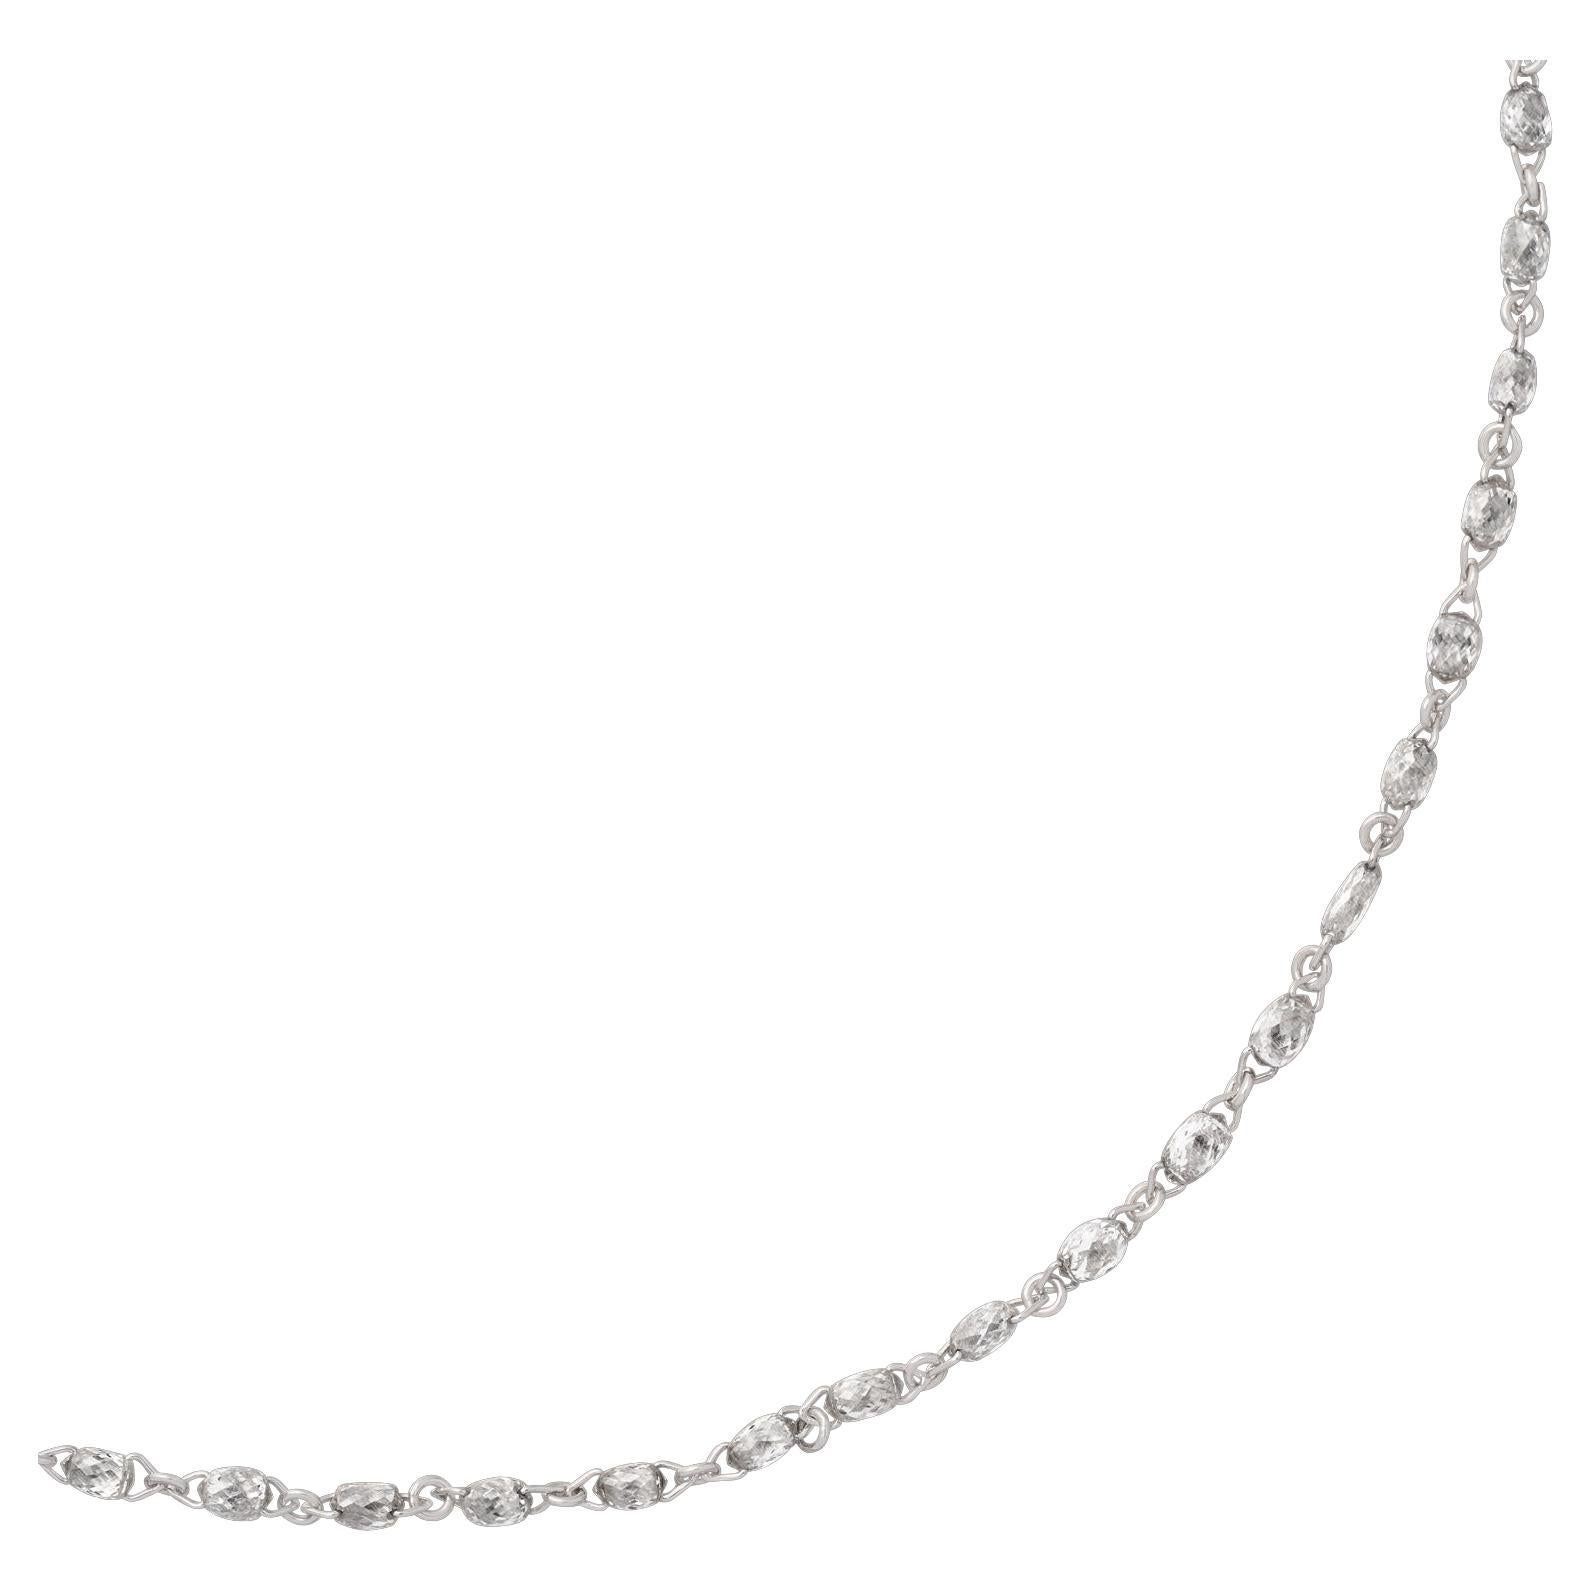 A contemporary twist on a classic design. This stunning 18 karat white gold diamond necklace features 84 expertly cut briolette diamonds weighing a total of 7.57 carats, perfectly strung and delivering maximum sparkle and brilliant averaging H/SI.